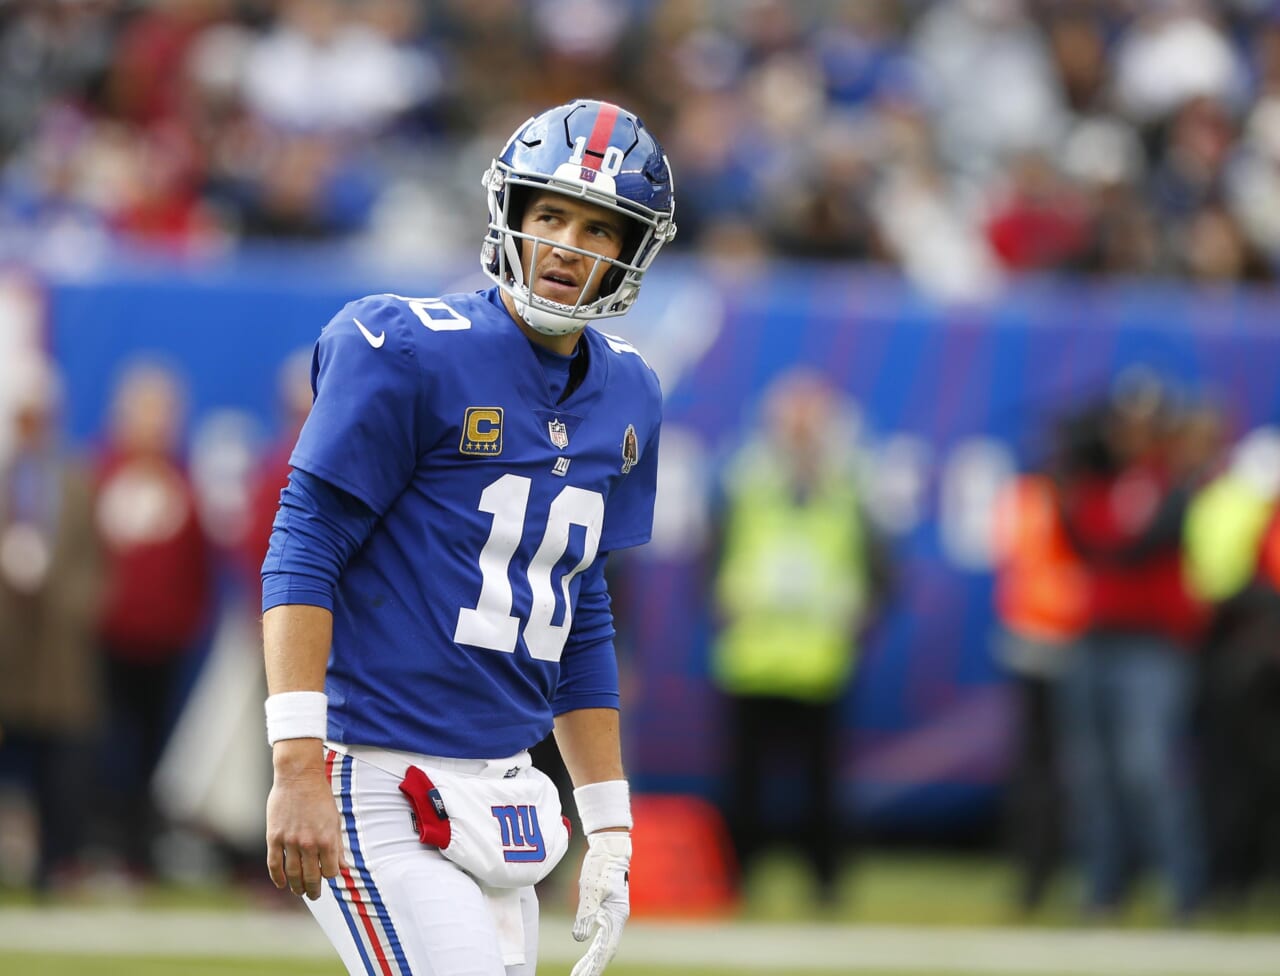 New York Giants: What if Eli Manning Struggles During the 2019 Season?